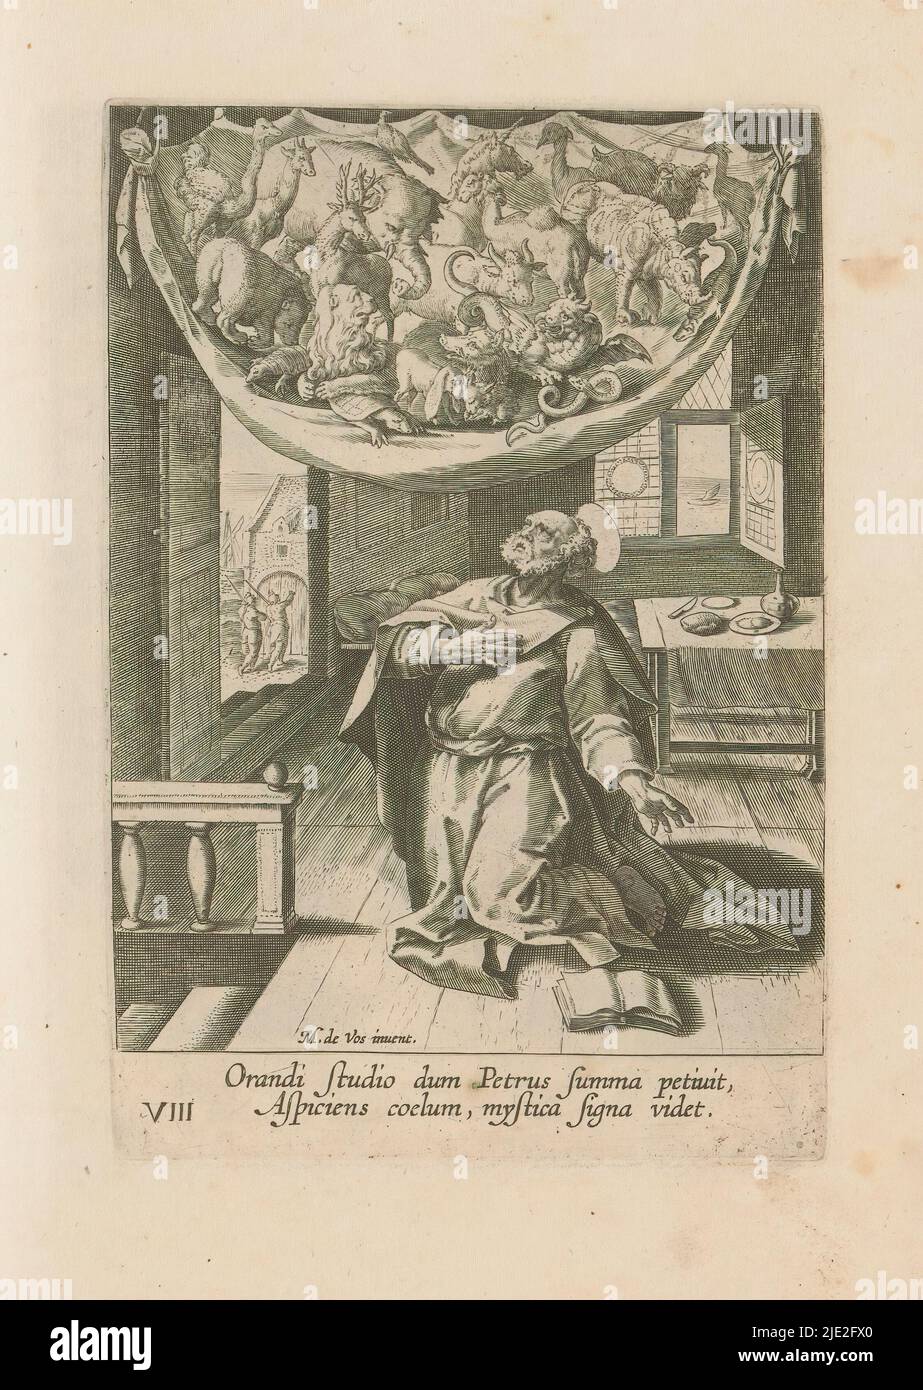 Peter's vision of the unclean animals, Acts of the Apostles (series title), Simon Peter praying in the house of Simon the tanner. Above him appears a sheet with all kinds of unclean animals. Numbered in the lower left: VIII. Below in the margin a two-line caption in Latin. Part of a series of twelve representations of the Acts of the Apostles. Part of an album of mainly Christian representations., print maker: anonymous, after design by: Maerten de Vos, (mentioned on object), publisher: Frederik de Wit, after design by: Antwerp, publisher: Amsterdam, 1580 - 1585 and/or 1654, paper, engraving, Stock Photo